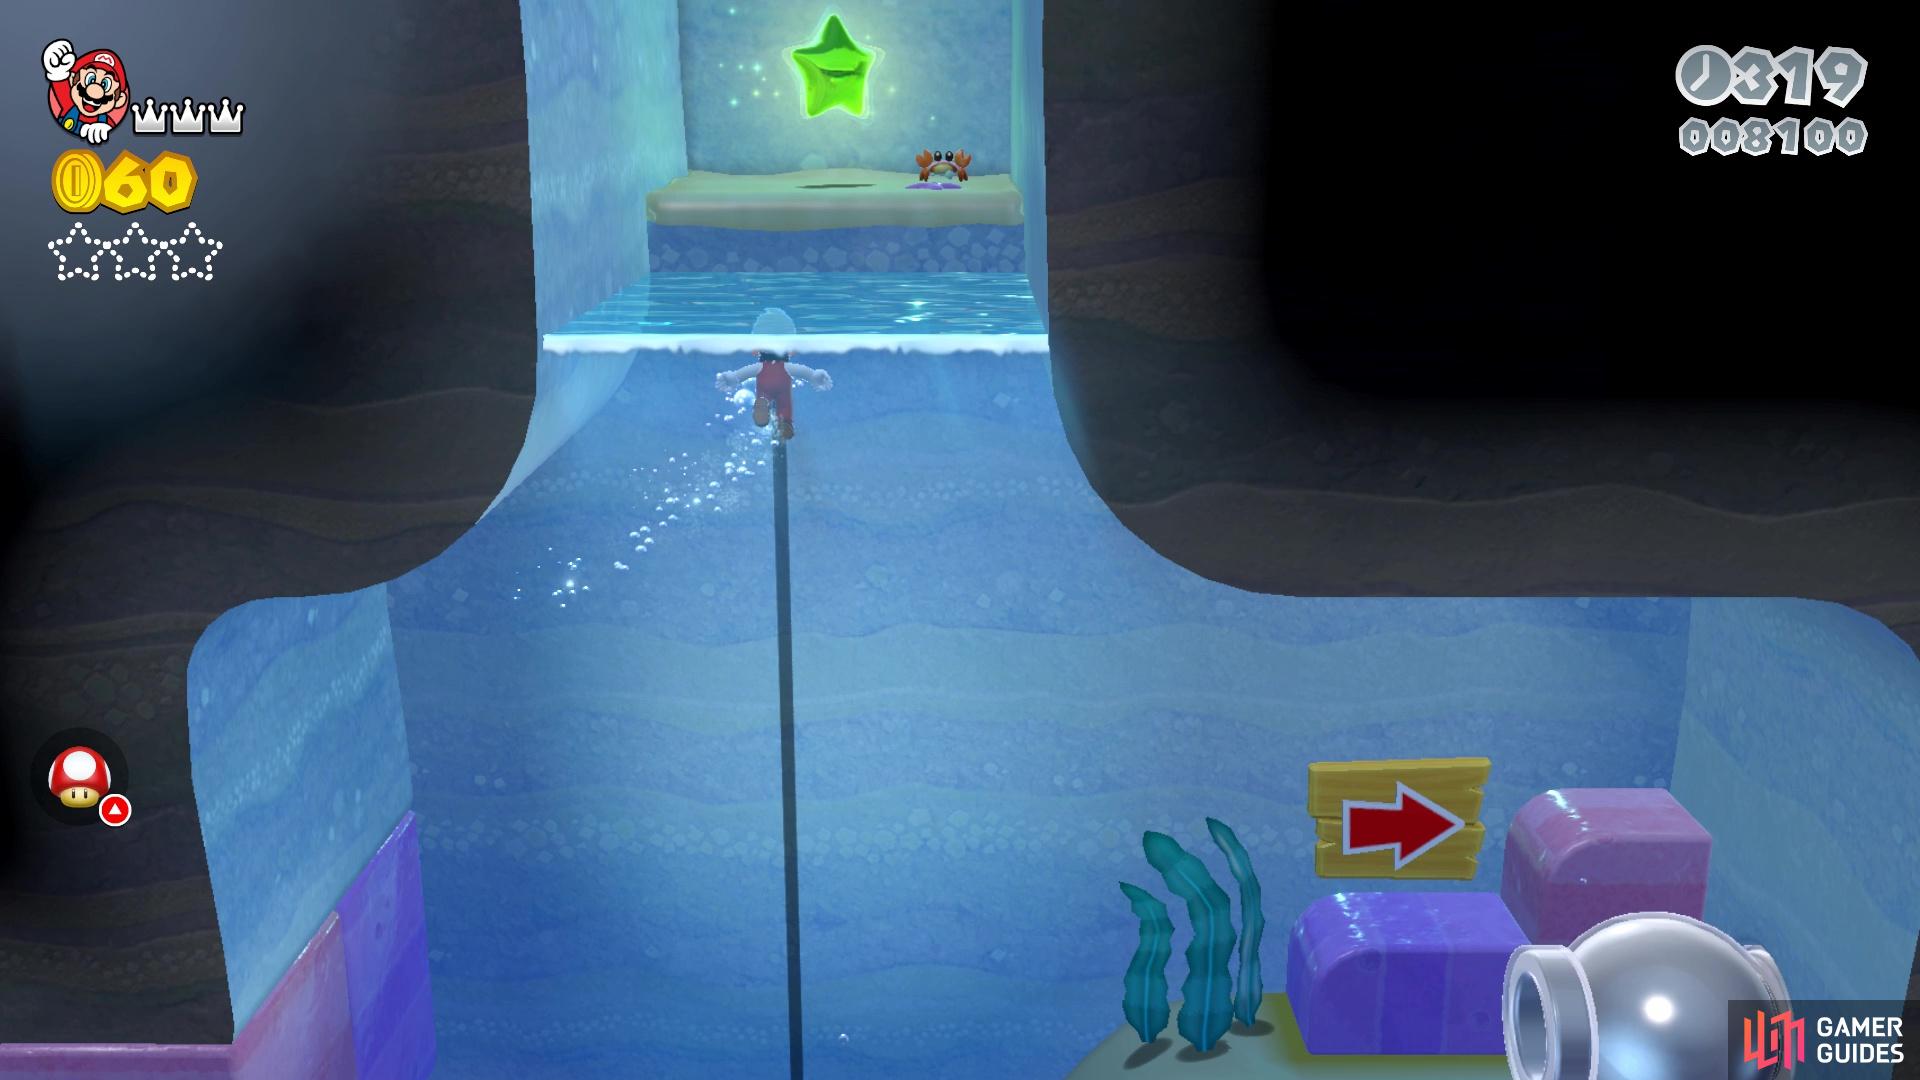 The first Green Star can be found right before the exit of the first underwater area